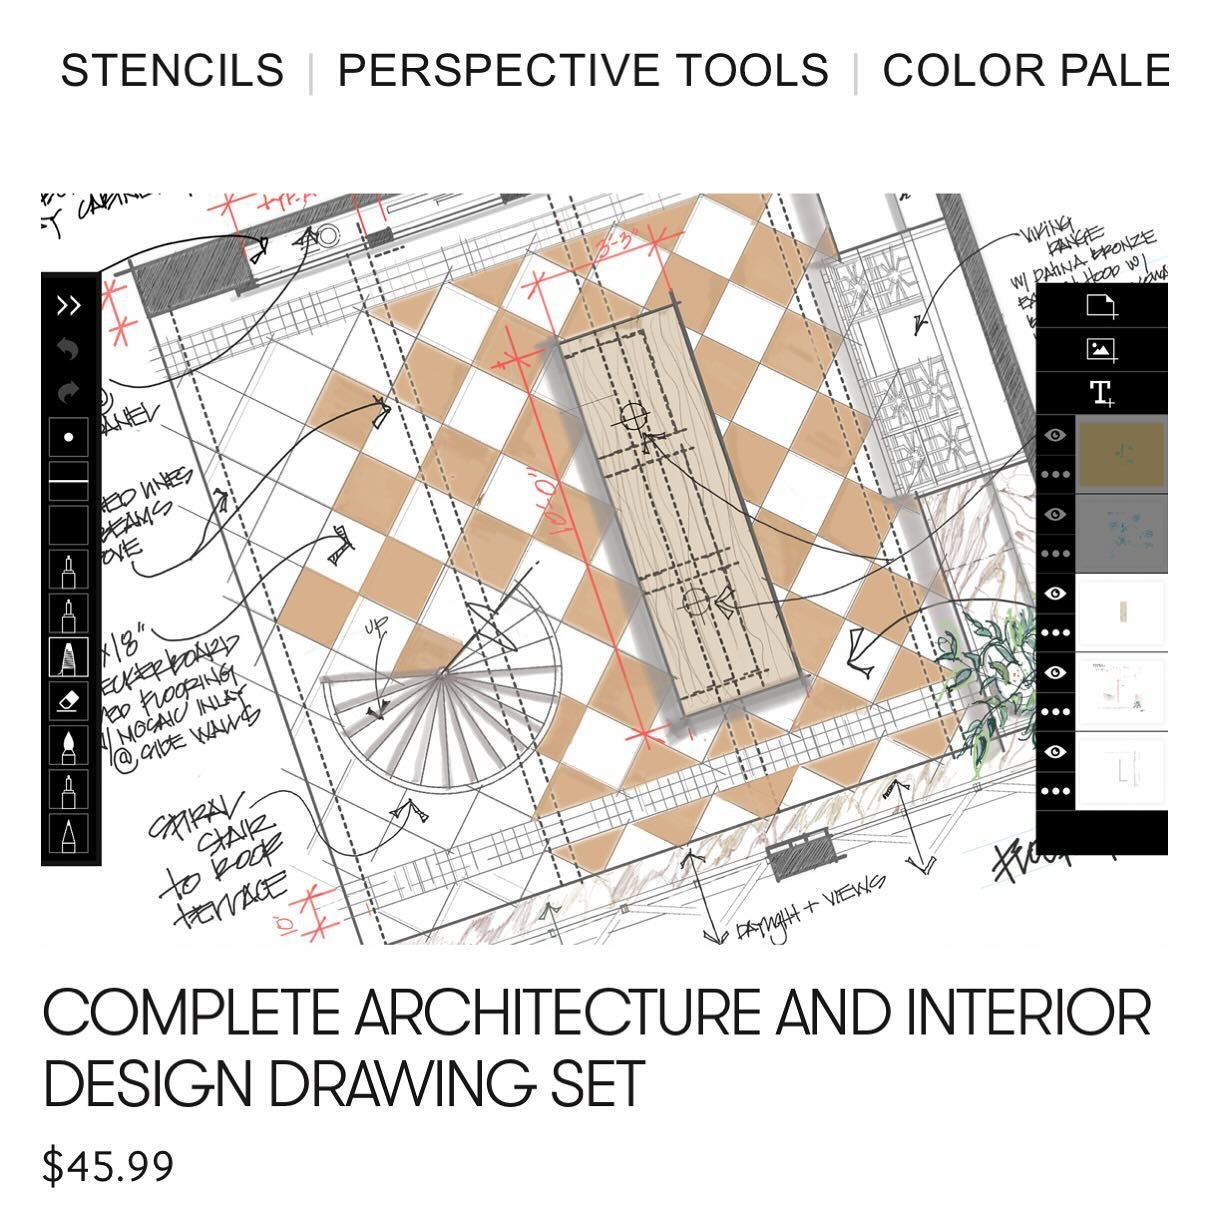 PLAN BY HAND 🤚🏼 | Everything made by hand is better. Especially floor plans! ✍🏼 Keeping the art of architecture alive with @morpholio Check out our website where you can purchase digital tools to create beautiful floor plans, interior elevations, 